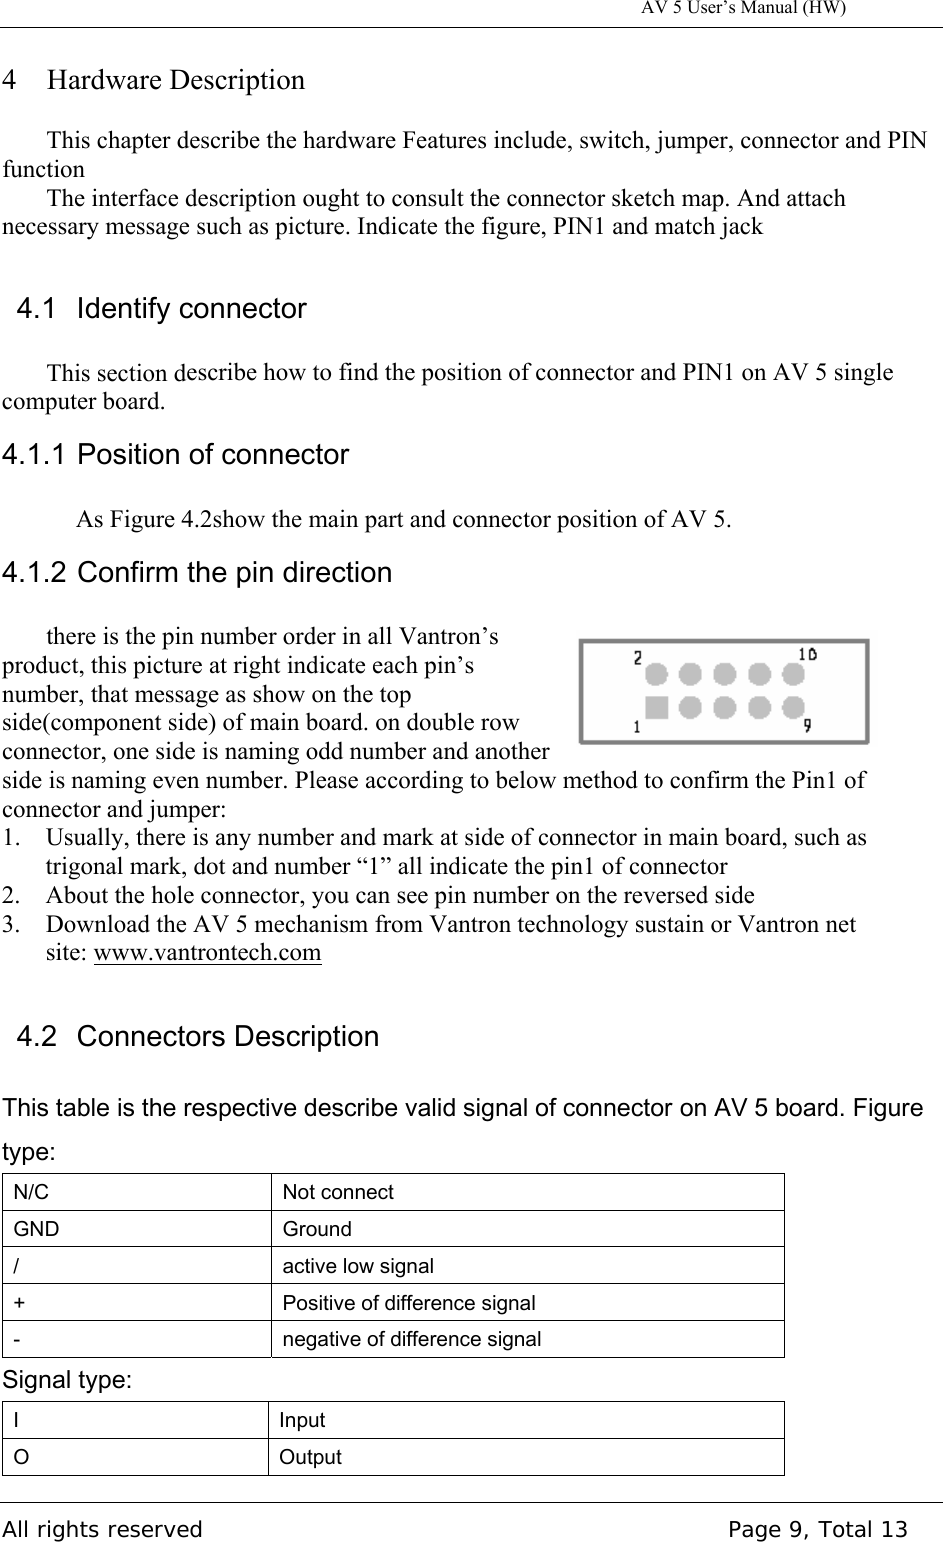 All rights reserved    Page 9, Total 13 4 Hardware Description This chapter describe the hardware Features include, switch, jumper, connector and PIN function The interface description ought to consult the connector sketch map. And attach necessary message such as picture. Indicate the figure, PIN1 and match jack   4.1 Identify connector This section describe how to find the position of connector and PIN1 on AV 5 single computer board. 4.1.1 Position of connector As Figure 4.2show the main part and connector position of AV 5. 4.1.2 Confirm the pin direction there is the pin number order in all Vantron’s   product, this picture at right indicate each pin’s number, that message as show on the top side(component side) of main board. on double row connector, one side is naming odd number and another side is naming even number. Please according to below method to confirm the Pin1 of connector and jumper: 1. Usually, there is any number and mark at side of connector in main board, such astrigonal mark, dot and number “1” all indicate the pin1 of connector 2. About the hole connector, you can see pin number on the reversed side3. Download the AV 5 mechanism from Vantron technology sustain or Vantron netsite: www.vantrontech.com4.2 Connectors Description This table is the respective describe valid signal of connector on AV 5 board. Figure type: N/C  Not connect GND  Ground /  active low signal +  Positive of difference signal -  negative of difference signal Signal type: I  Input O  Output AV 5 User’s Manual (HW) 